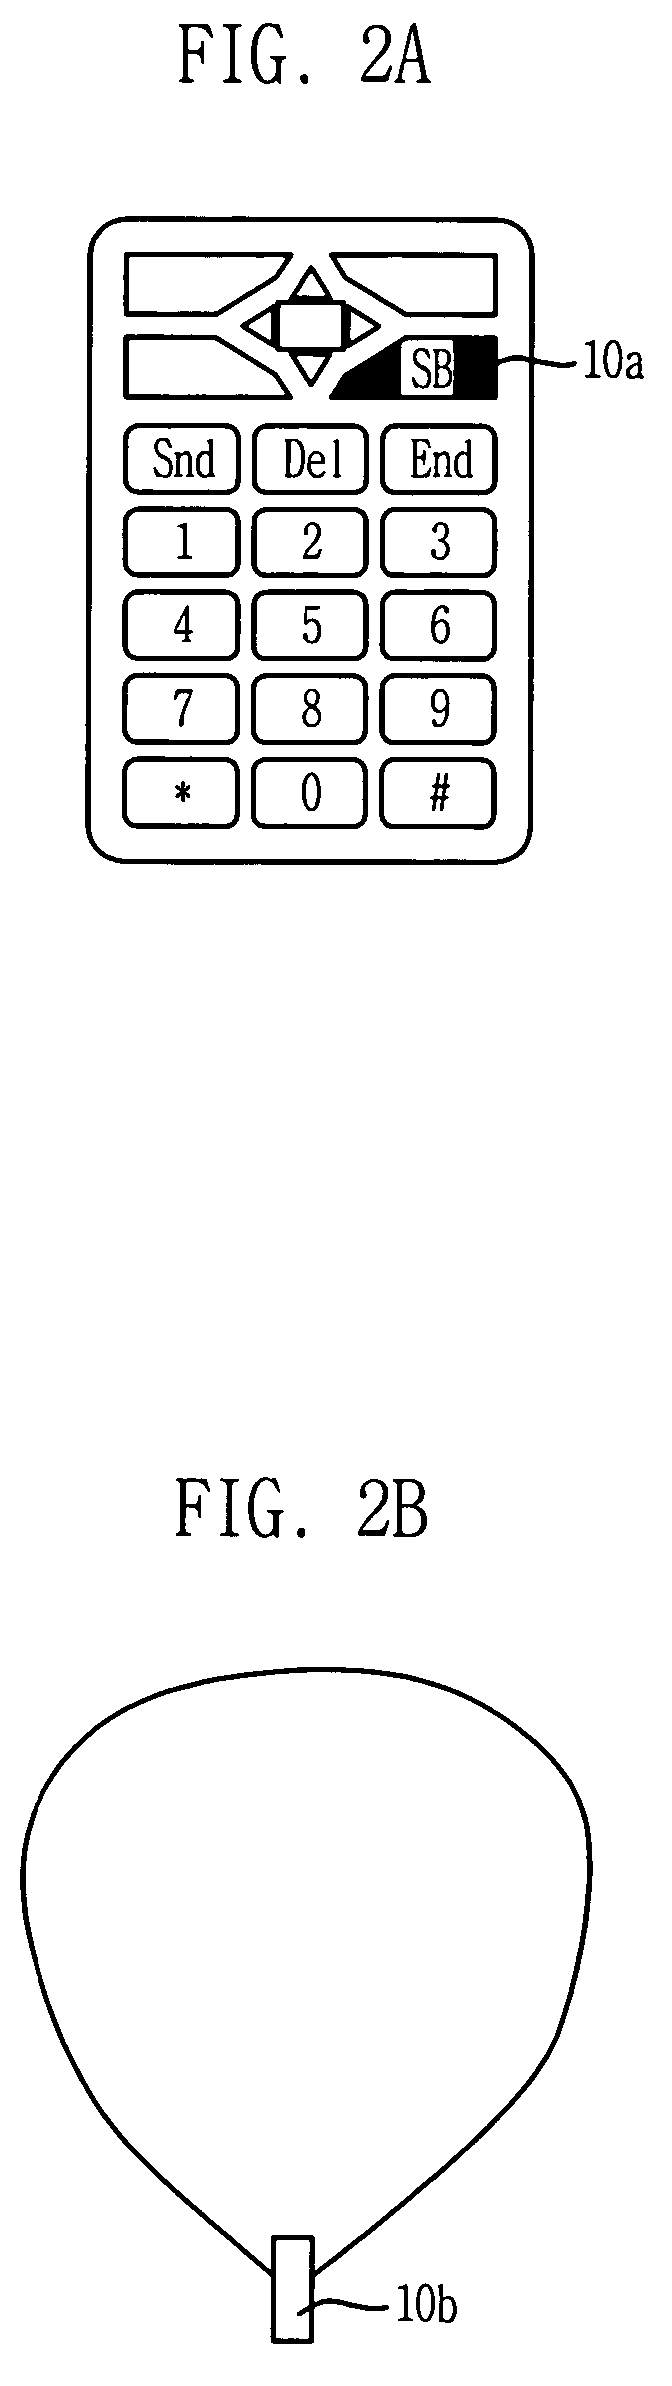 User interface apparatus for context-aware environments, device controlling apparatus and method thereof